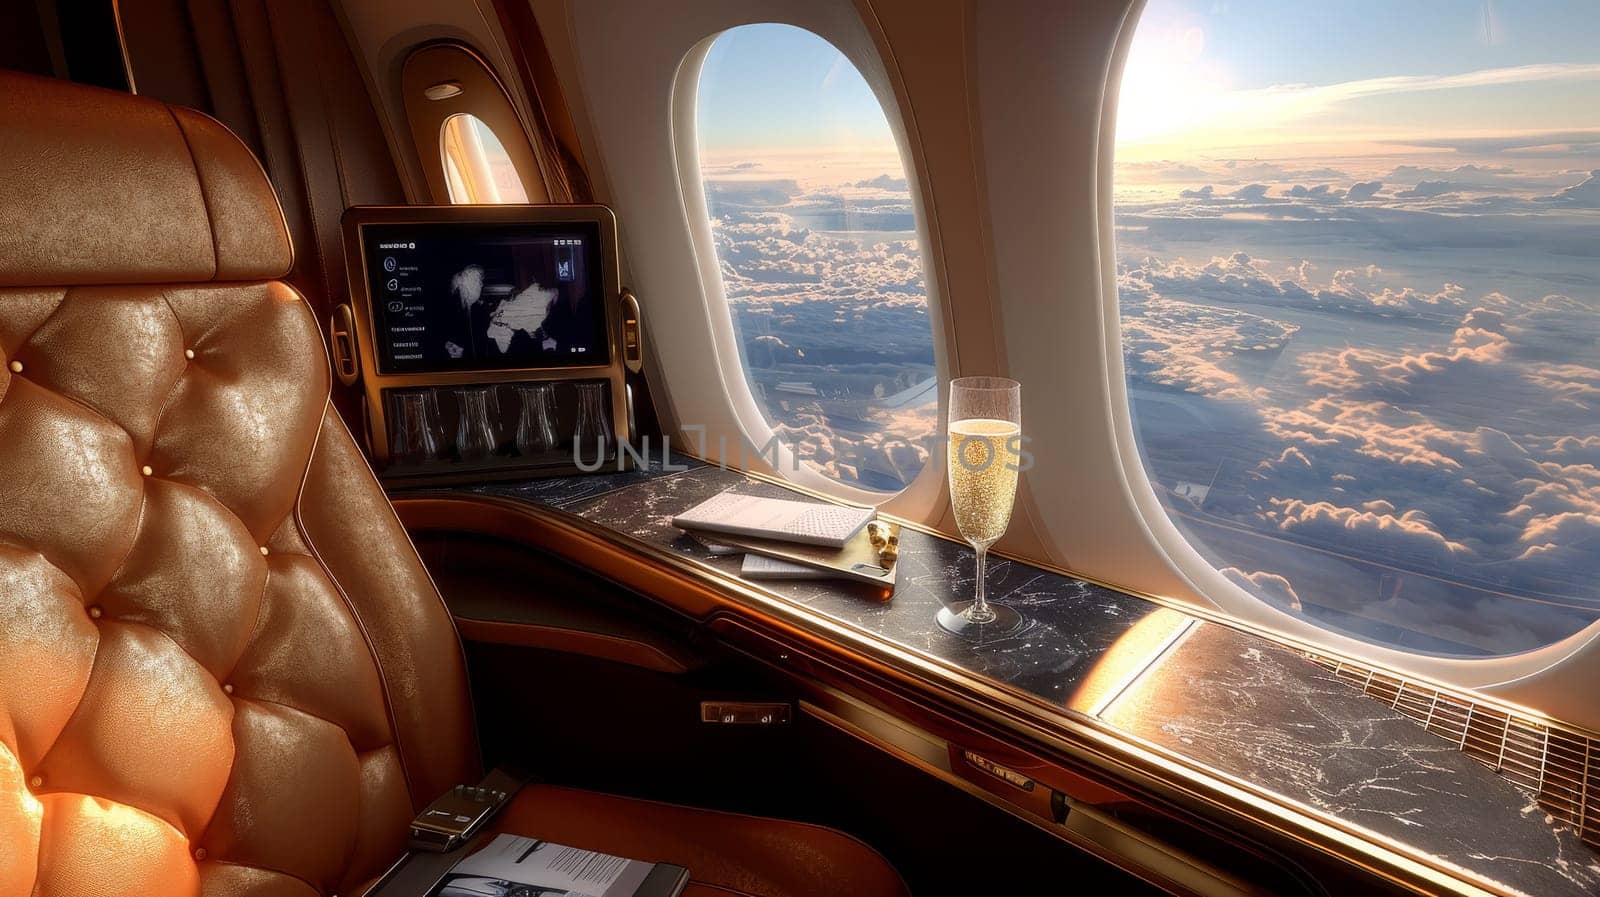 A luxurious airplane with two leather seats and a champagne glass. Private seat on private jet.